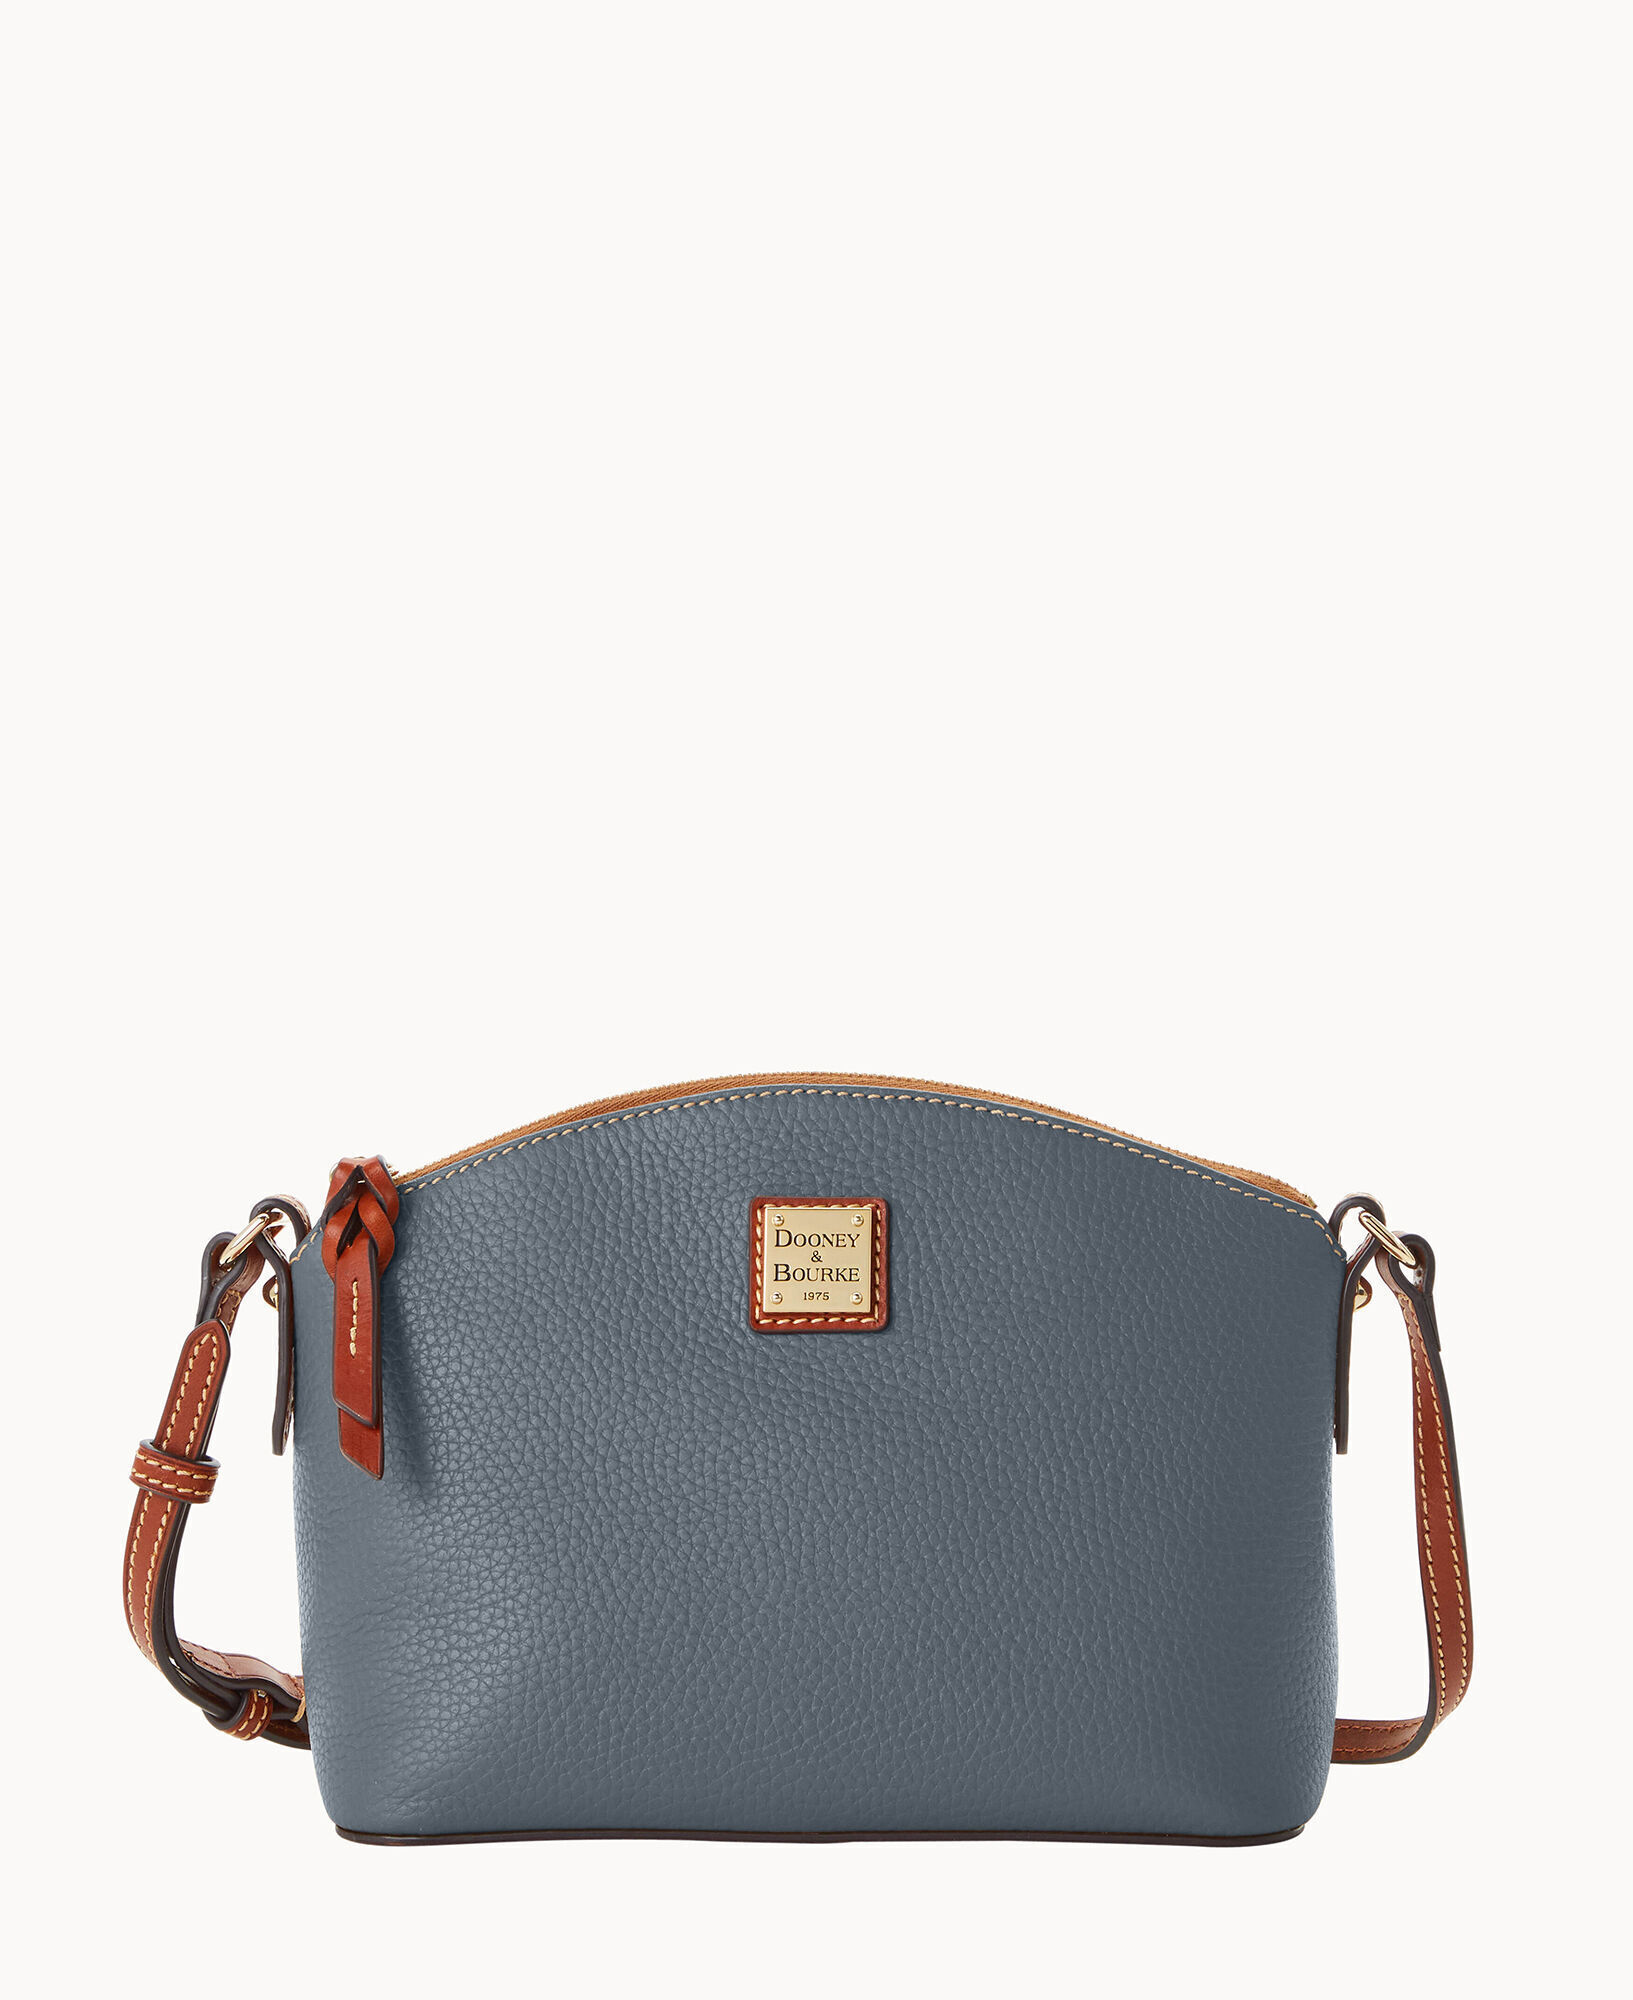 Dooney & Bourke Leather Saffiano Domed Satchel on QVC 